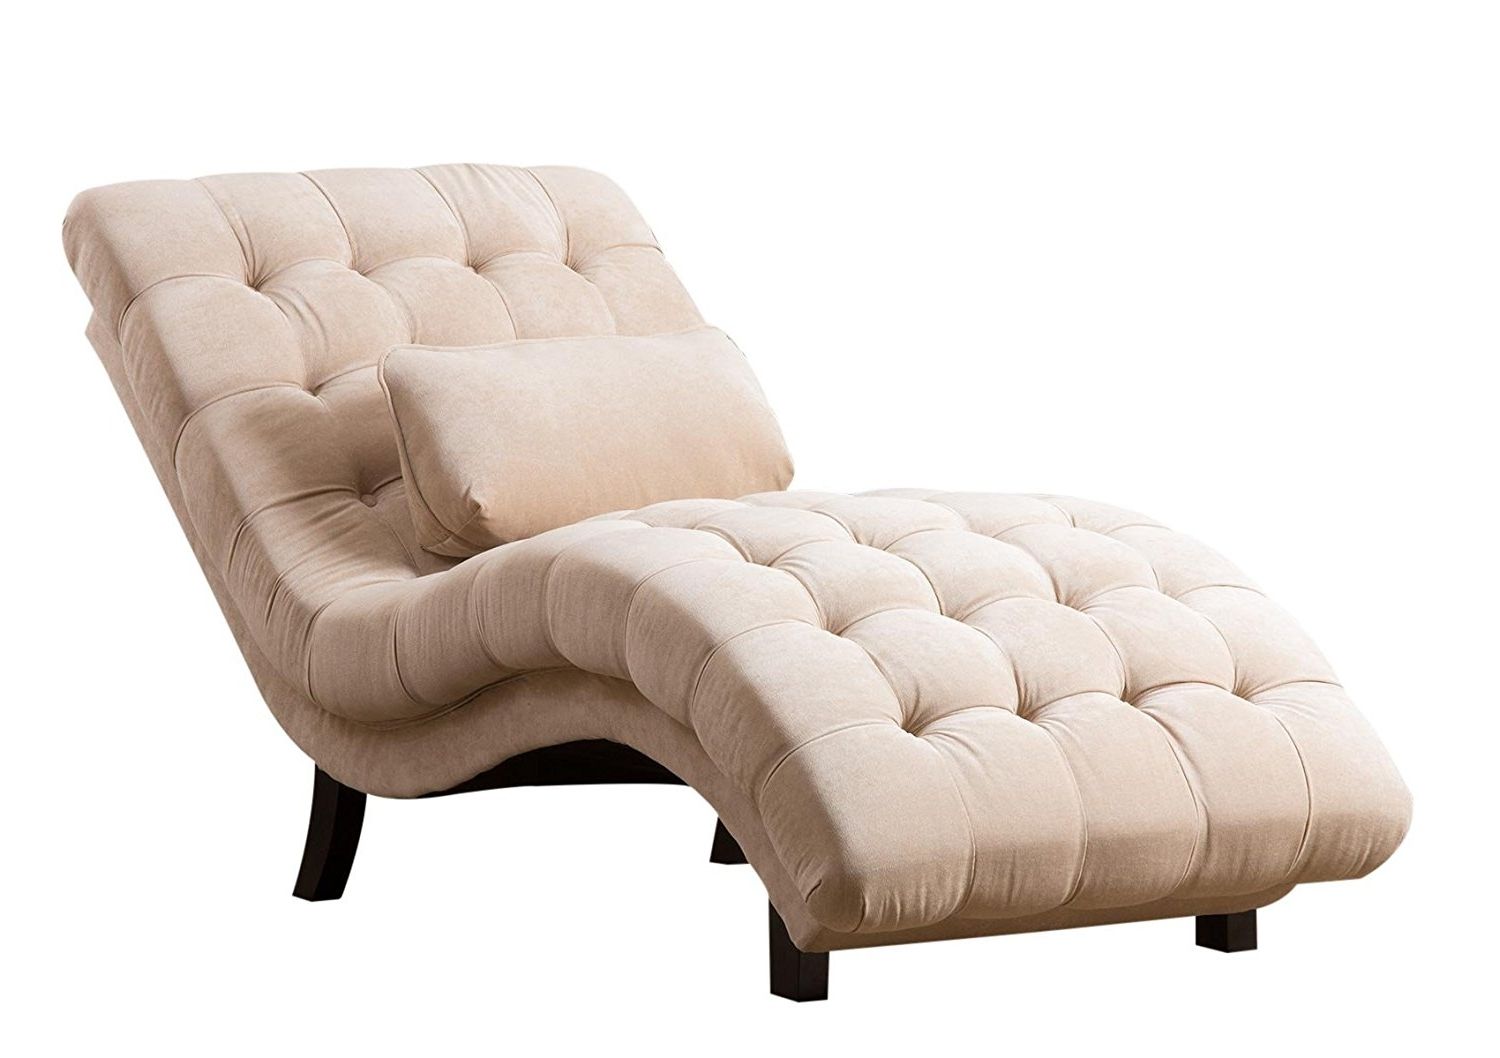 Well Known Amazon: Abbyson Carmen Cream Fabric Chaise: Home & Kitchen For Tufted Chaise Lounge Chairs (View 3 of 15)